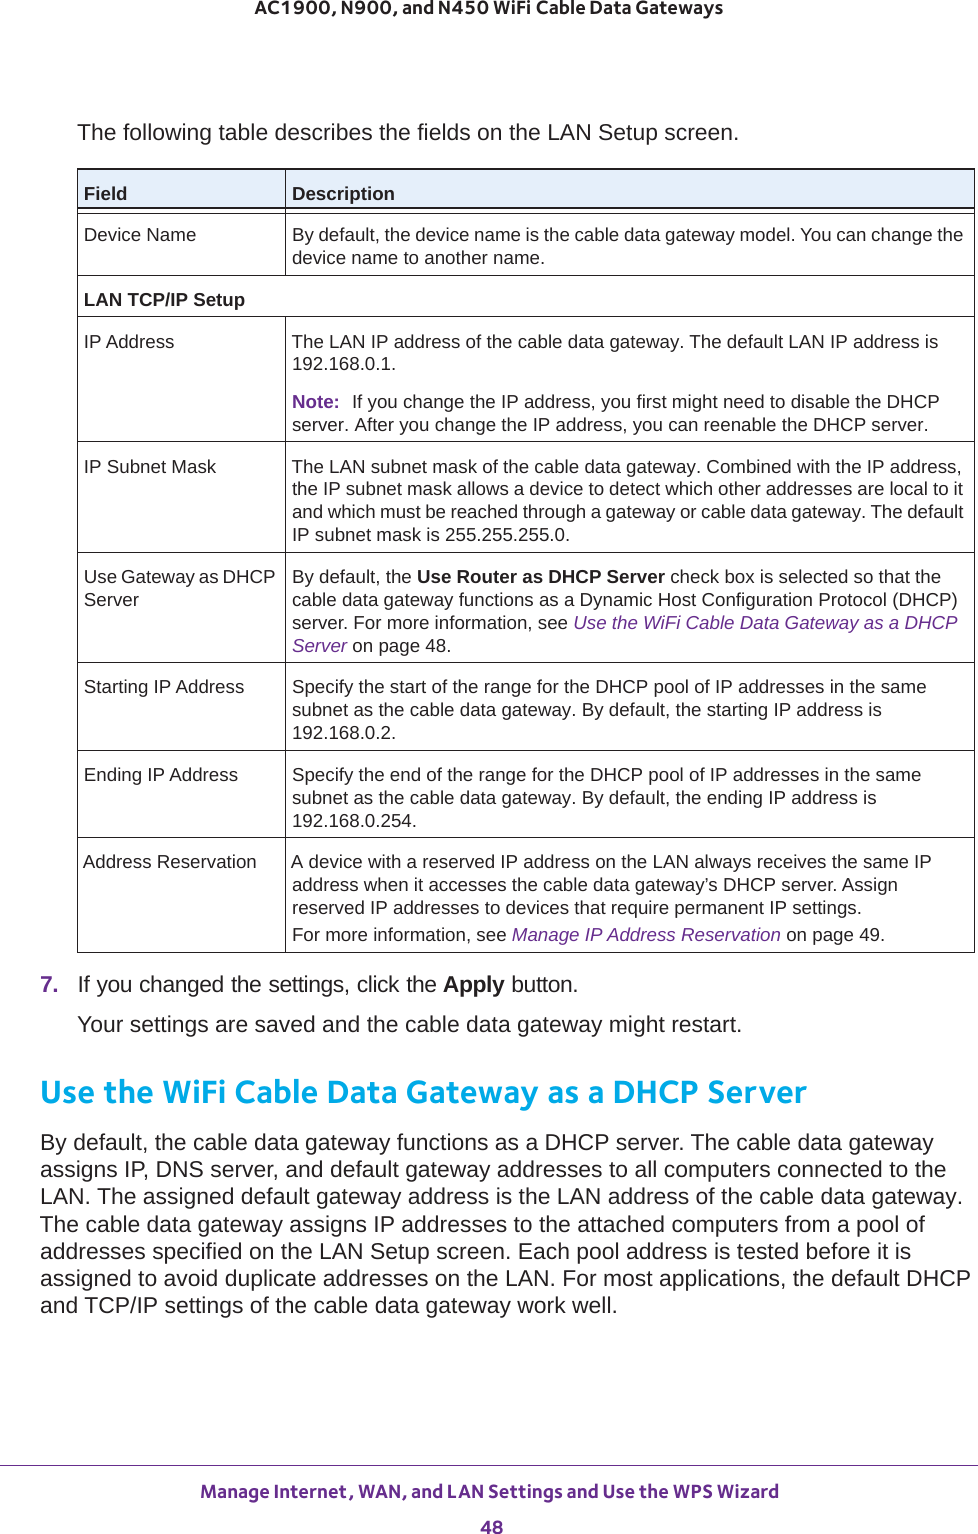 Manage Internet, WAN, and LAN Settings and Use the WPS Wizard 48AC1900, N900, and N450 WiFi Cable Data Gateways The following table describes the fields on the LAN Setup screen.Field DescriptionDevice Name By default, the device name is the cable data gateway model. You can change the device name to another name.LAN TCP/IP Setup IP Address The LAN IP address of the cable data gateway. The default LAN IP address is 192.168.0.1.IP Subnet Mask The LAN subnet mask of the cable data gateway. Combined with the IP address, the IP subnet mask allows a device to detect which other addresses are local to it and which must be reached through a gateway or cable data gateway. The default IP subnet mask is 255.255.255.0.Use Gateway as DHCP ServerBy default, the Use Router as DHCP Server check box is selected so that the cable data gateway functions as a Dynamic Host Configuration Protocol (DHCP) server. For more information, see Use the WiFi Cable Data Gateway as a DHCP Server on page  48.Starting IP Address Specify the start of the range for the DHCP pool of IP addresses in the same subnet as the cable data gateway. By default, the starting IP address is 192.168.0.2.Ending IP Address Specify the end of the range for the DHCP pool of IP addresses in the same subnet as the cable data gateway. By default, the ending IP address is 192.168.0.254.Address Reservation A device with a reserved IP address on the LAN always receives the same IP address when it accesses the cable data gateway’s DHCP server. Assign reserved IP addresses to devices that require permanent IP settings. For more information, see Manage IP Address Reservation on page  49.7.  If you changed the settings, click the Apply button.Your settings are saved and the cable data gateway might restart.Use the WiFi Cable Data Gateway as a DHCP ServerBy default, the cable data gateway functions as a DHCP server. The cable data gateway assigns IP, DNS server, and default gateway addresses to all computers connected to the LAN. The assigned default gateway address is the LAN address of the cable data gateway. The cable data gateway assigns IP addresses to the attached computers from a pool of addresses specified on the LAN Setup screen. Each pool address is tested before it is assigned to avoid duplicate addresses on the LAN. For most applications, the default DHCP and TCP/IP settings of the cable data gateway work well.Note: If you change the IP address, you first might need to disable the DHCP server. After you change the IP address, you can reenable the DHCP server.